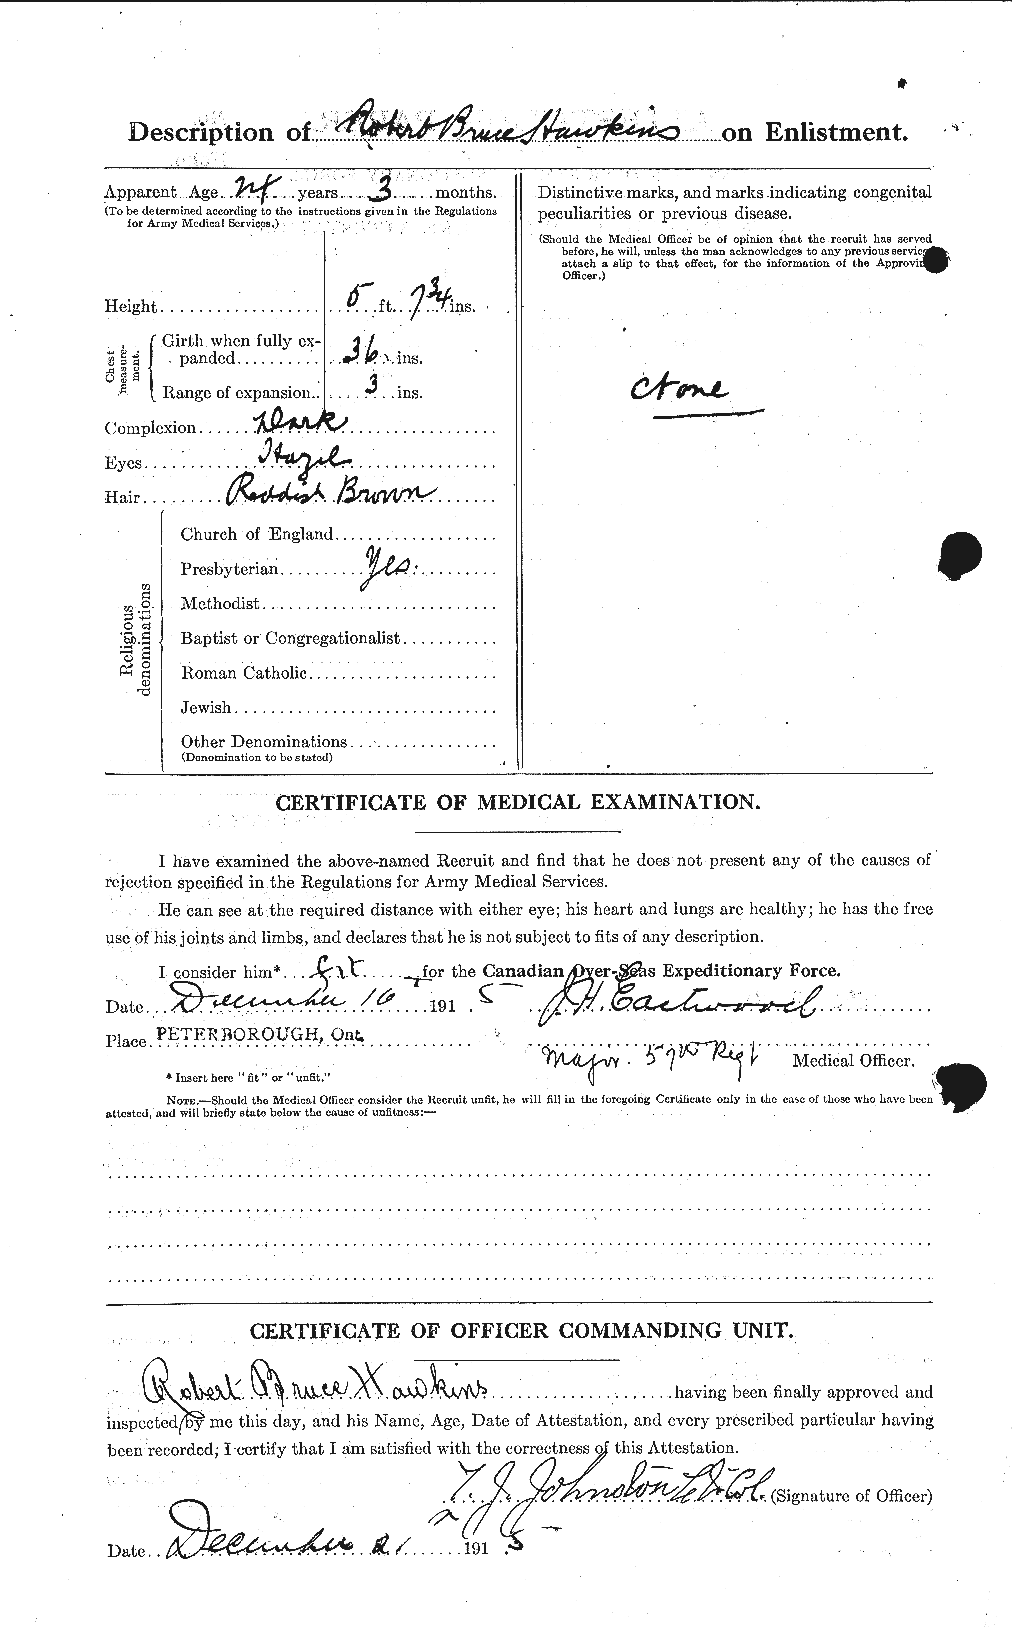 Personnel Records of the First World War - CEF 385594b